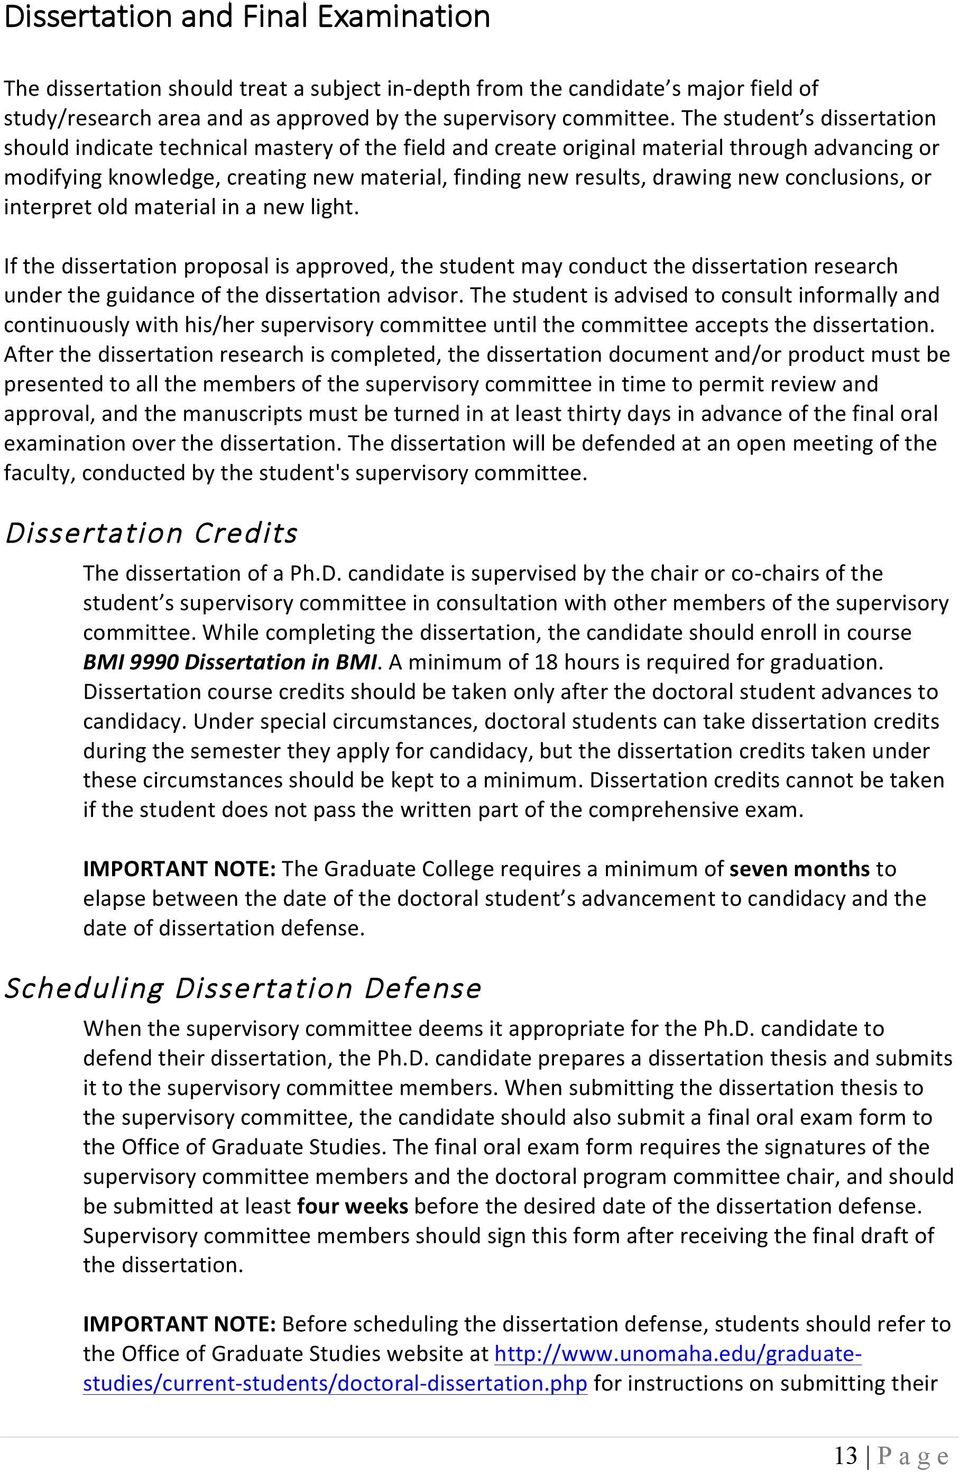 new conclusions, or interpret old material in a new light. If the dissertation proposal is approved, the student may conduct the dissertation research under the guidance of the dissertation advisor.